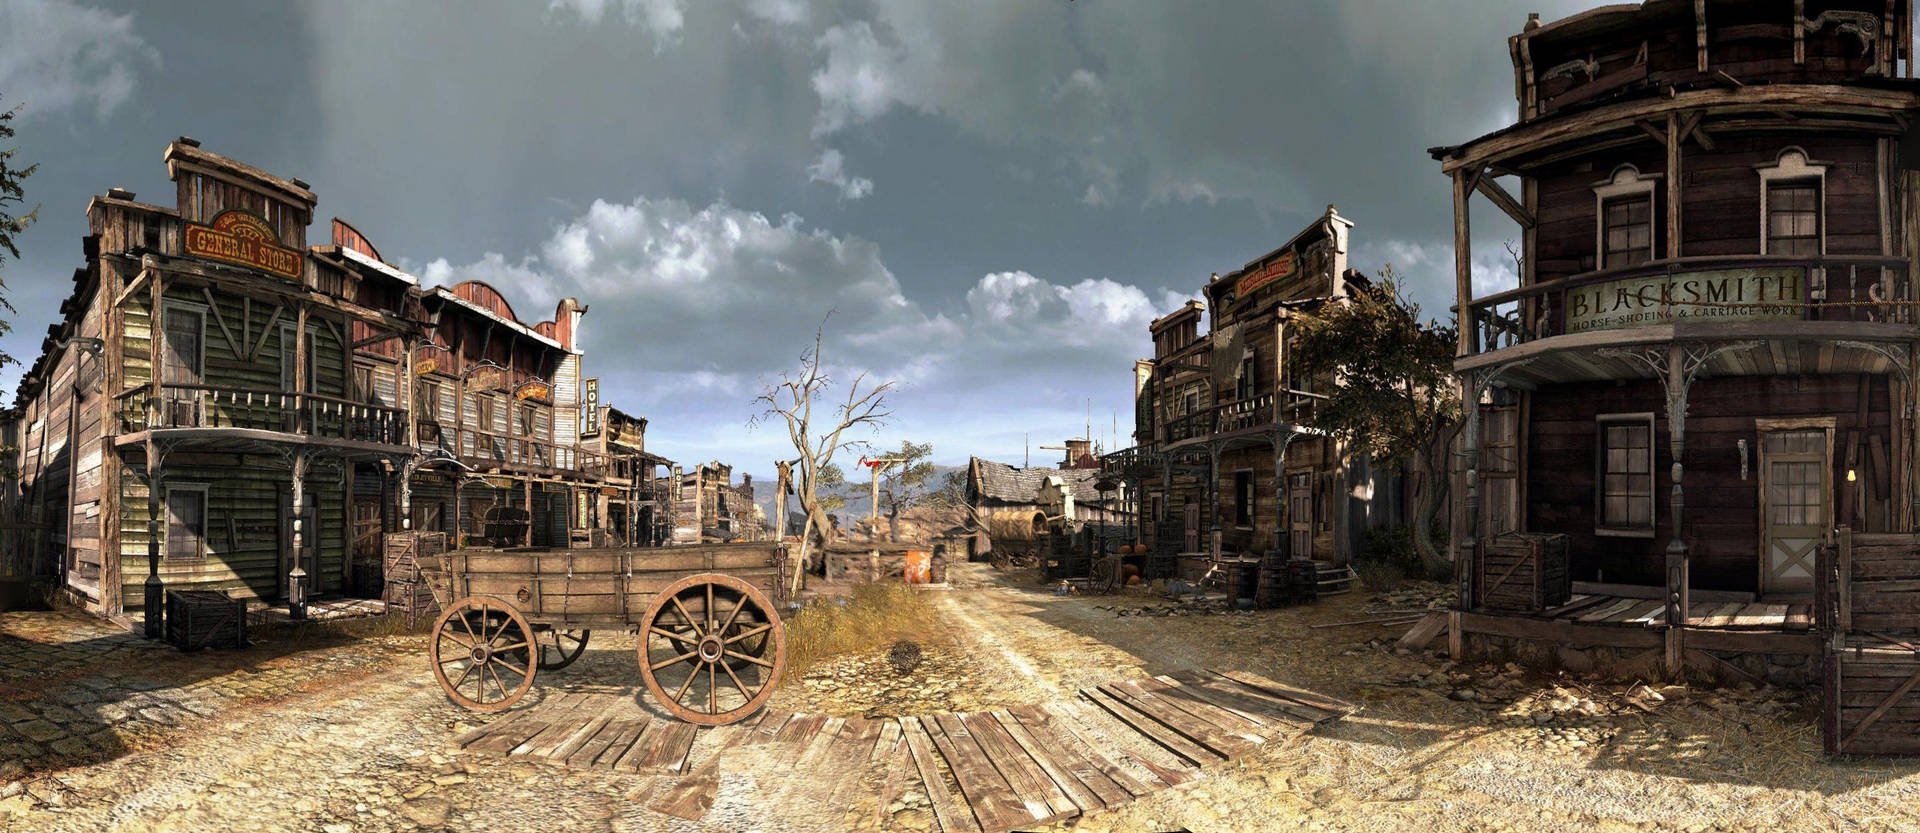 Old And Decaying Western Town Background